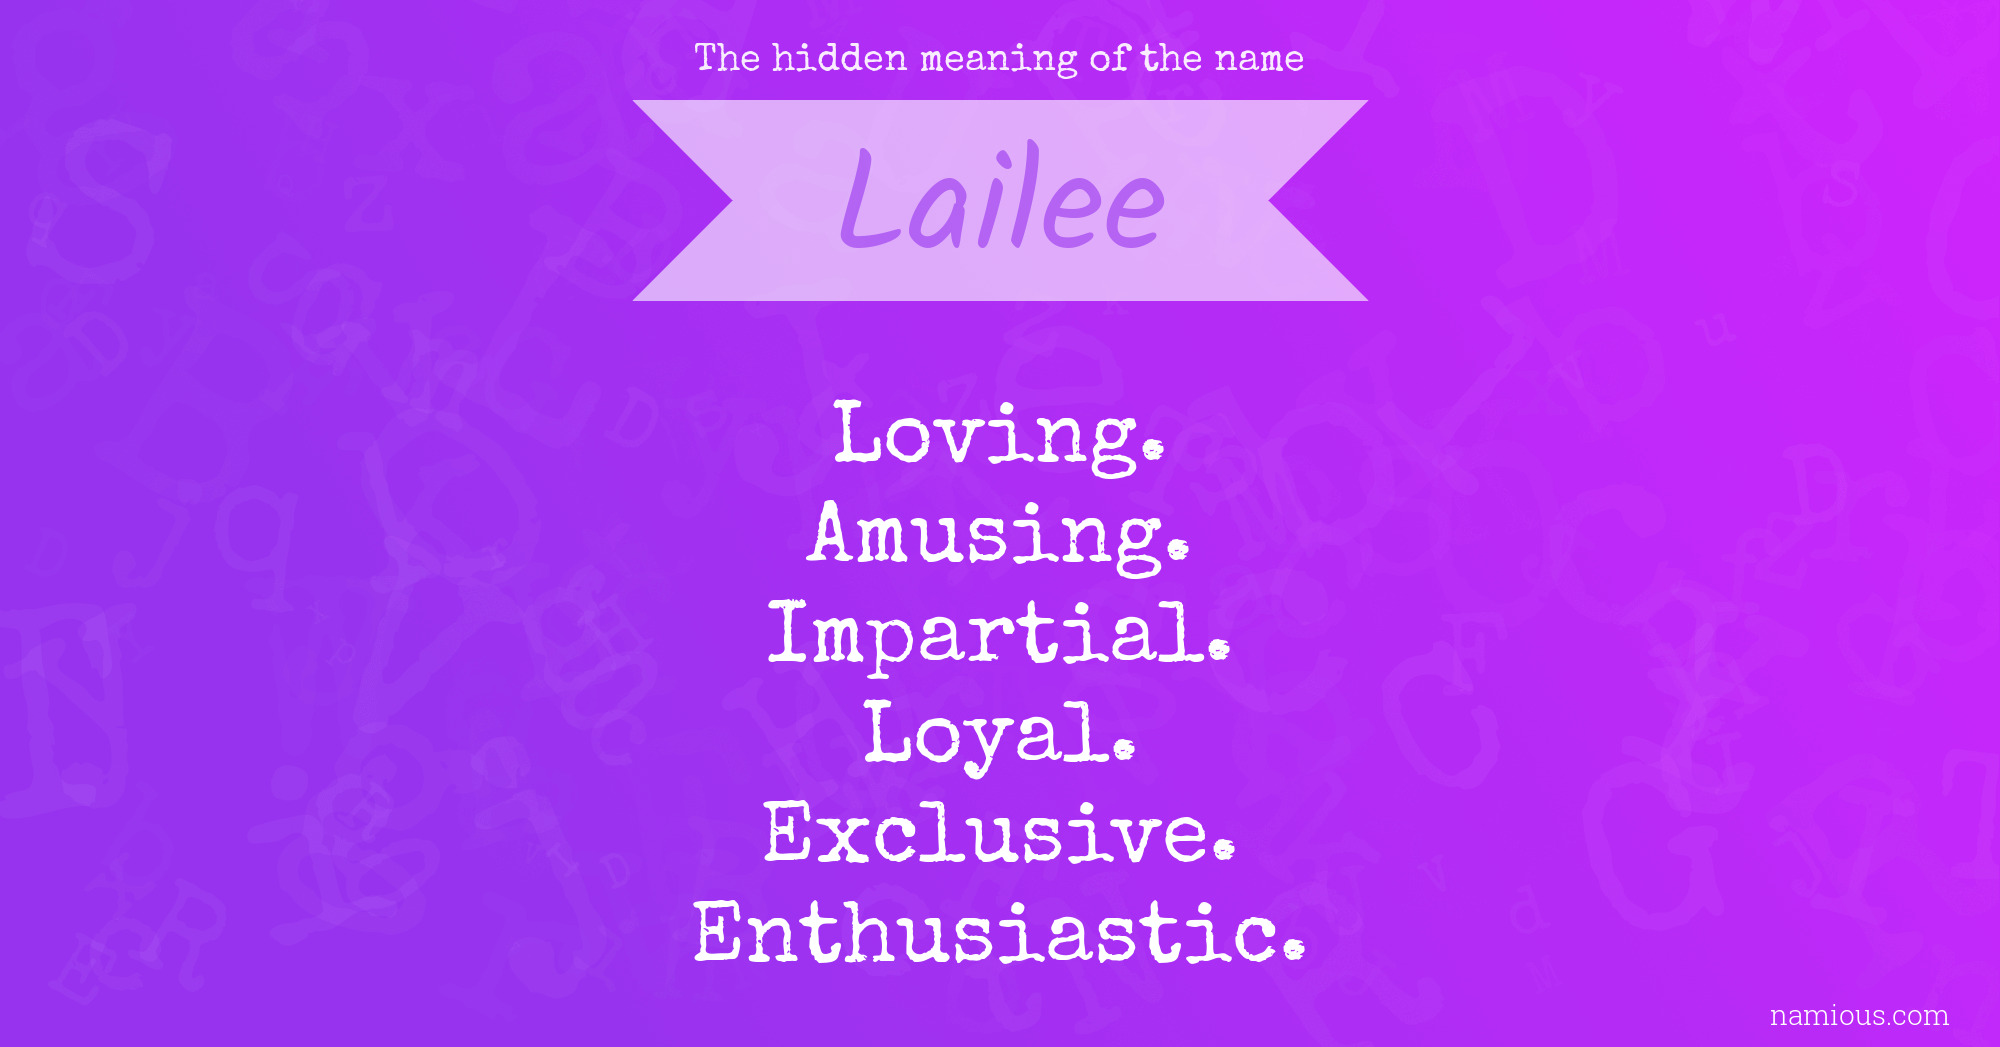 The hidden meaning of the name Lailee